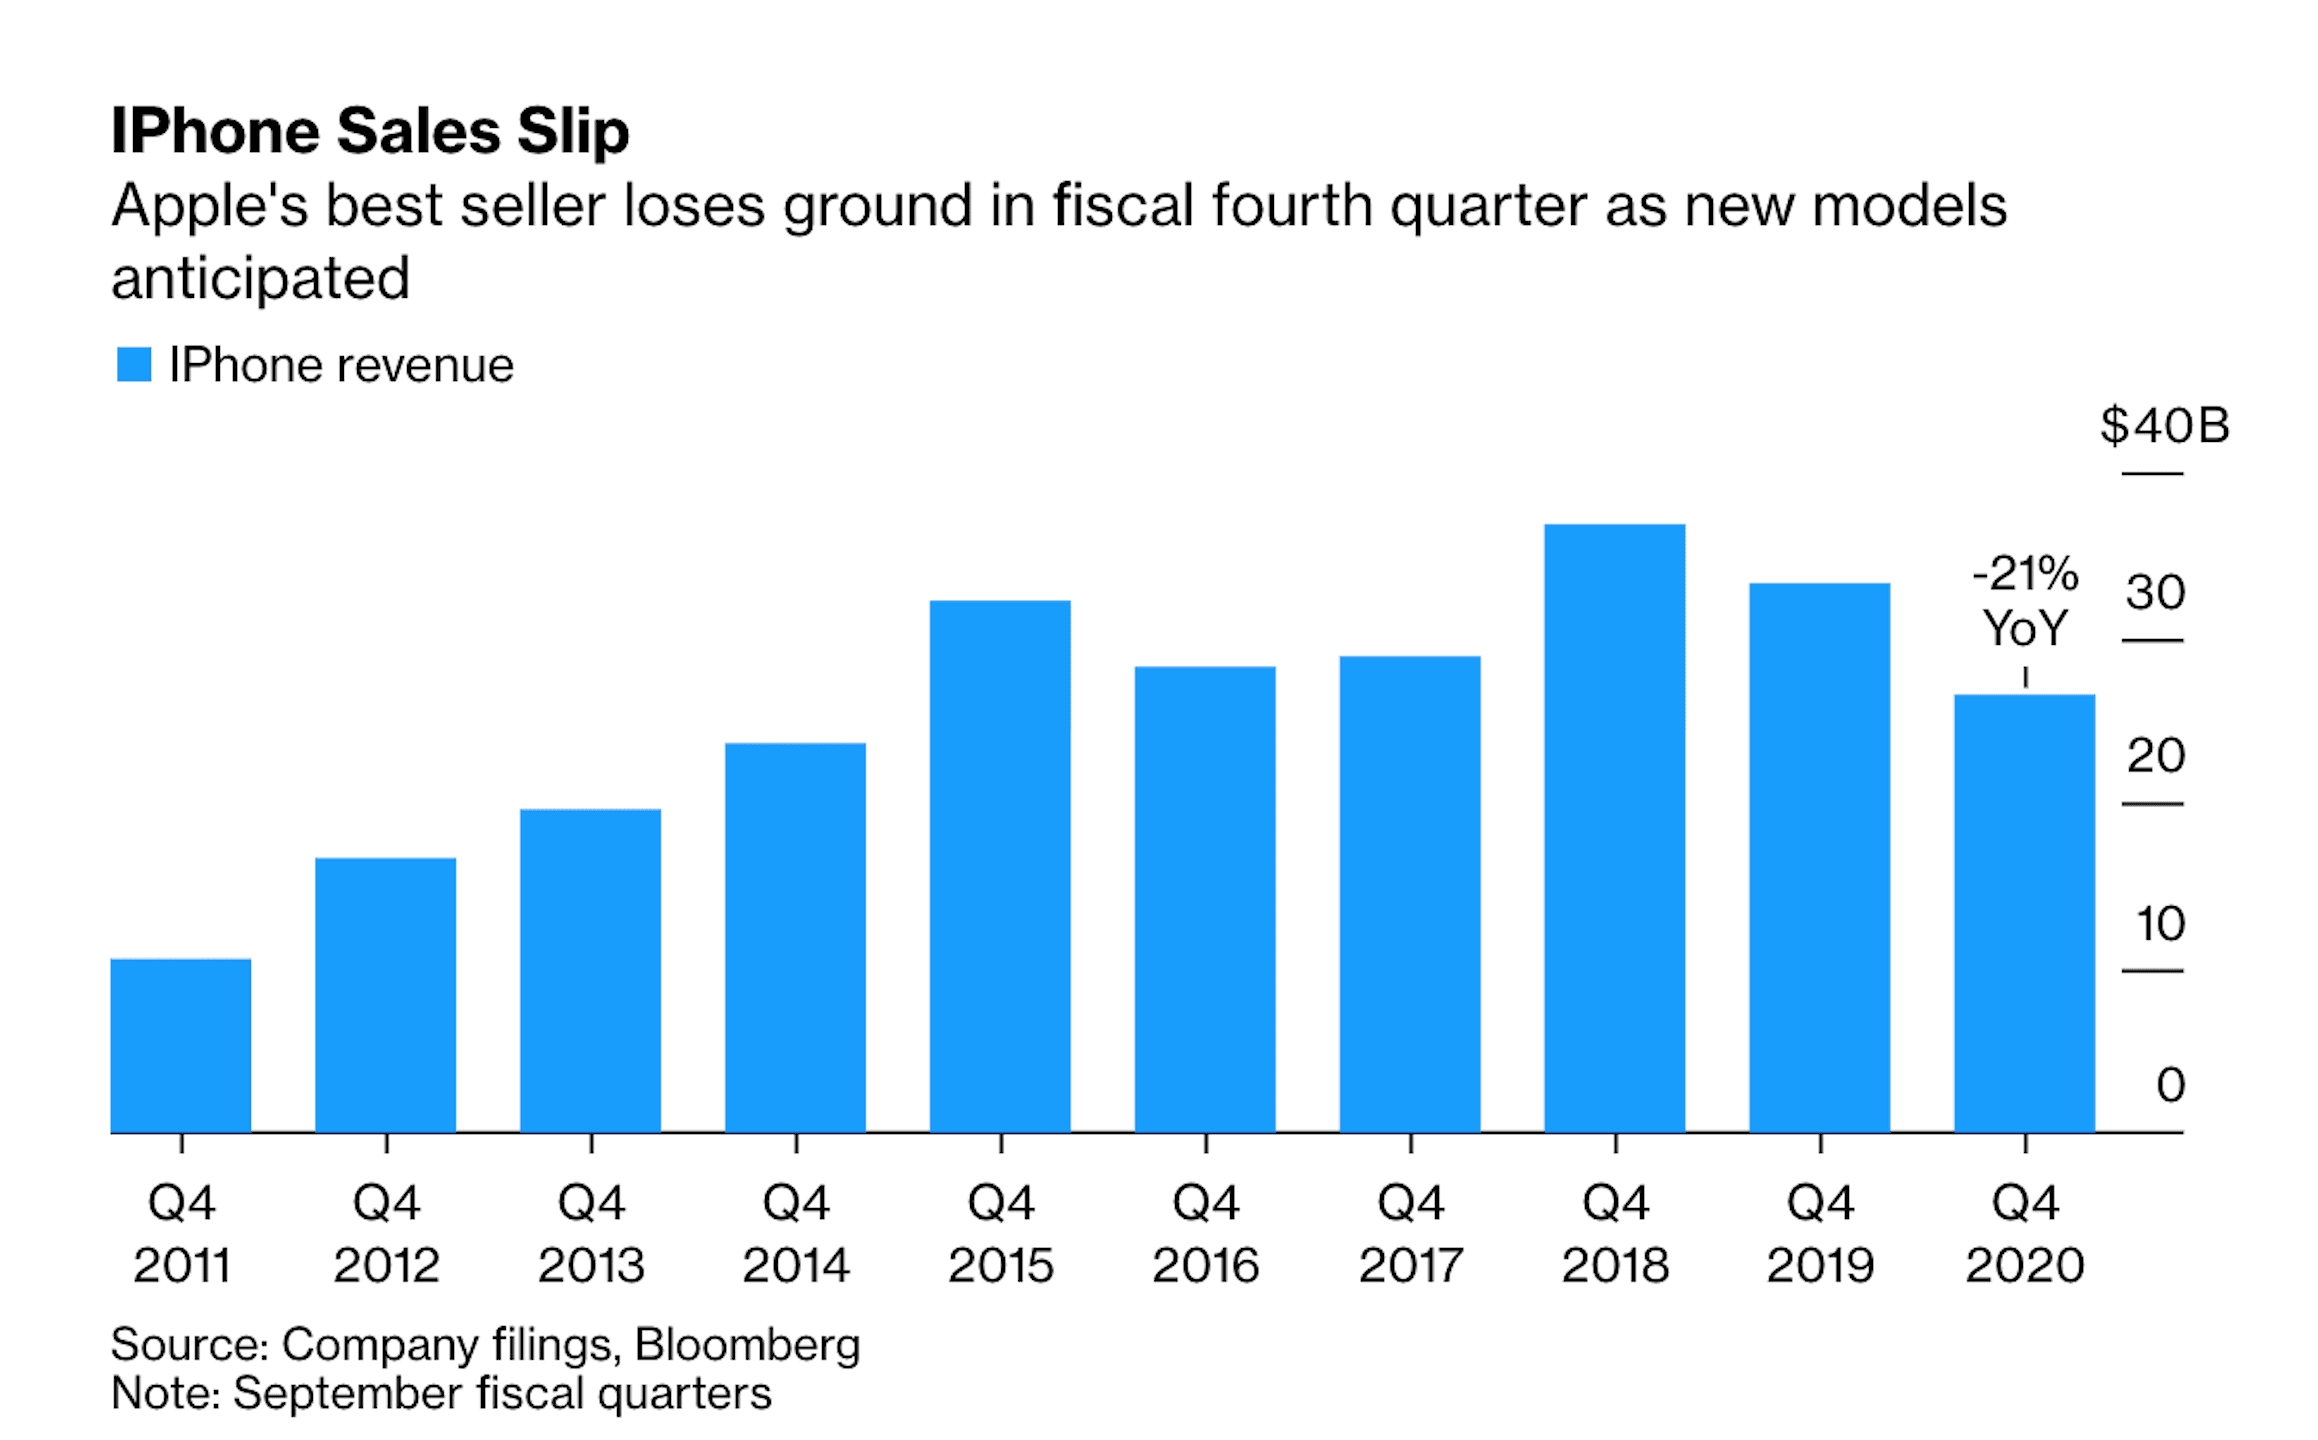 Apple's best seller loses ground in fiscal fourth quarter as new models anticipated